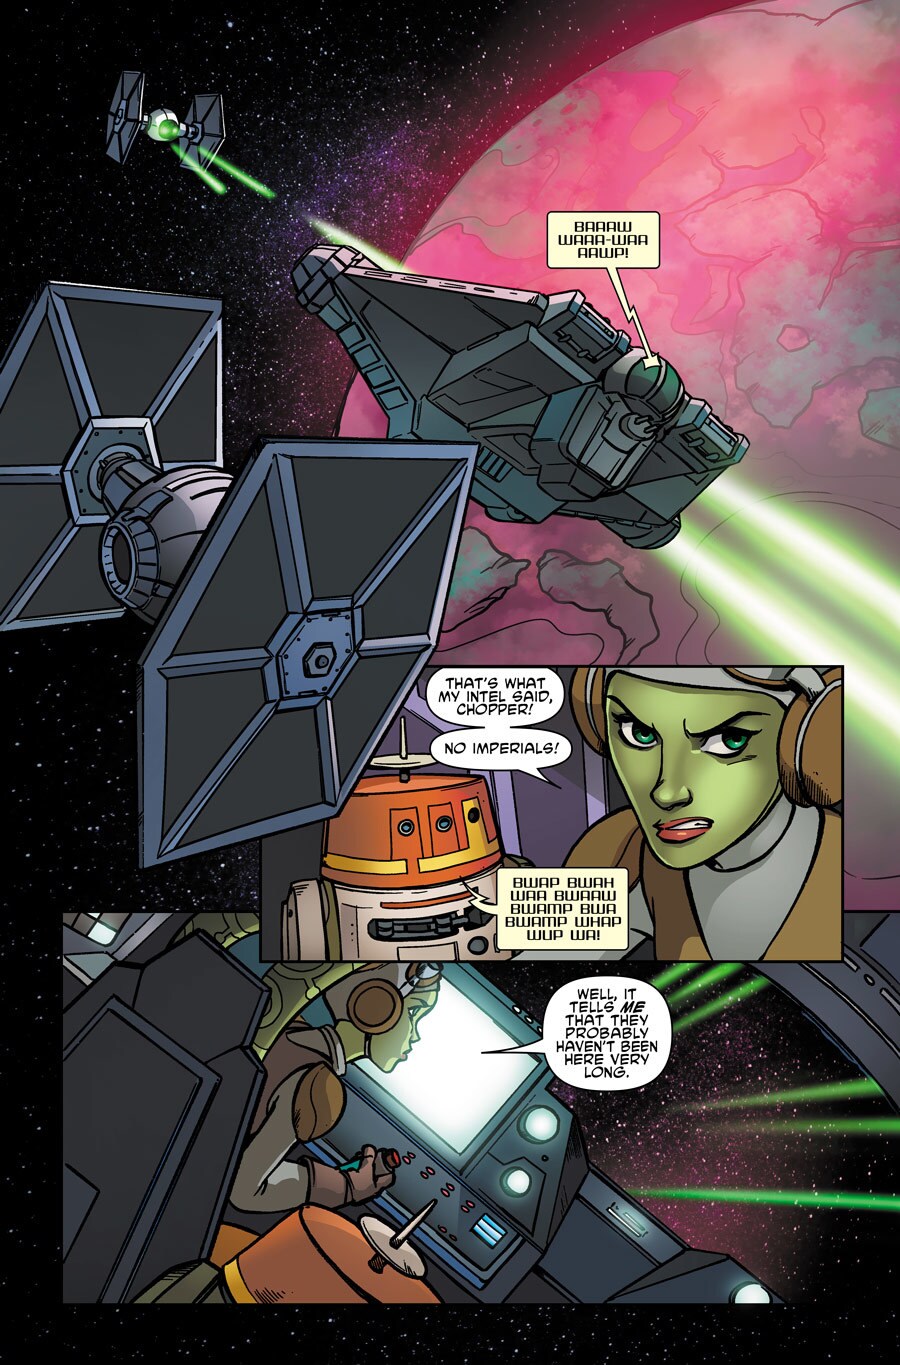 In a series of panels from the comic book Star Wars Forces of Destiny: Hera, Hera dodges fire from a TIE fighter while talking to Chopper.